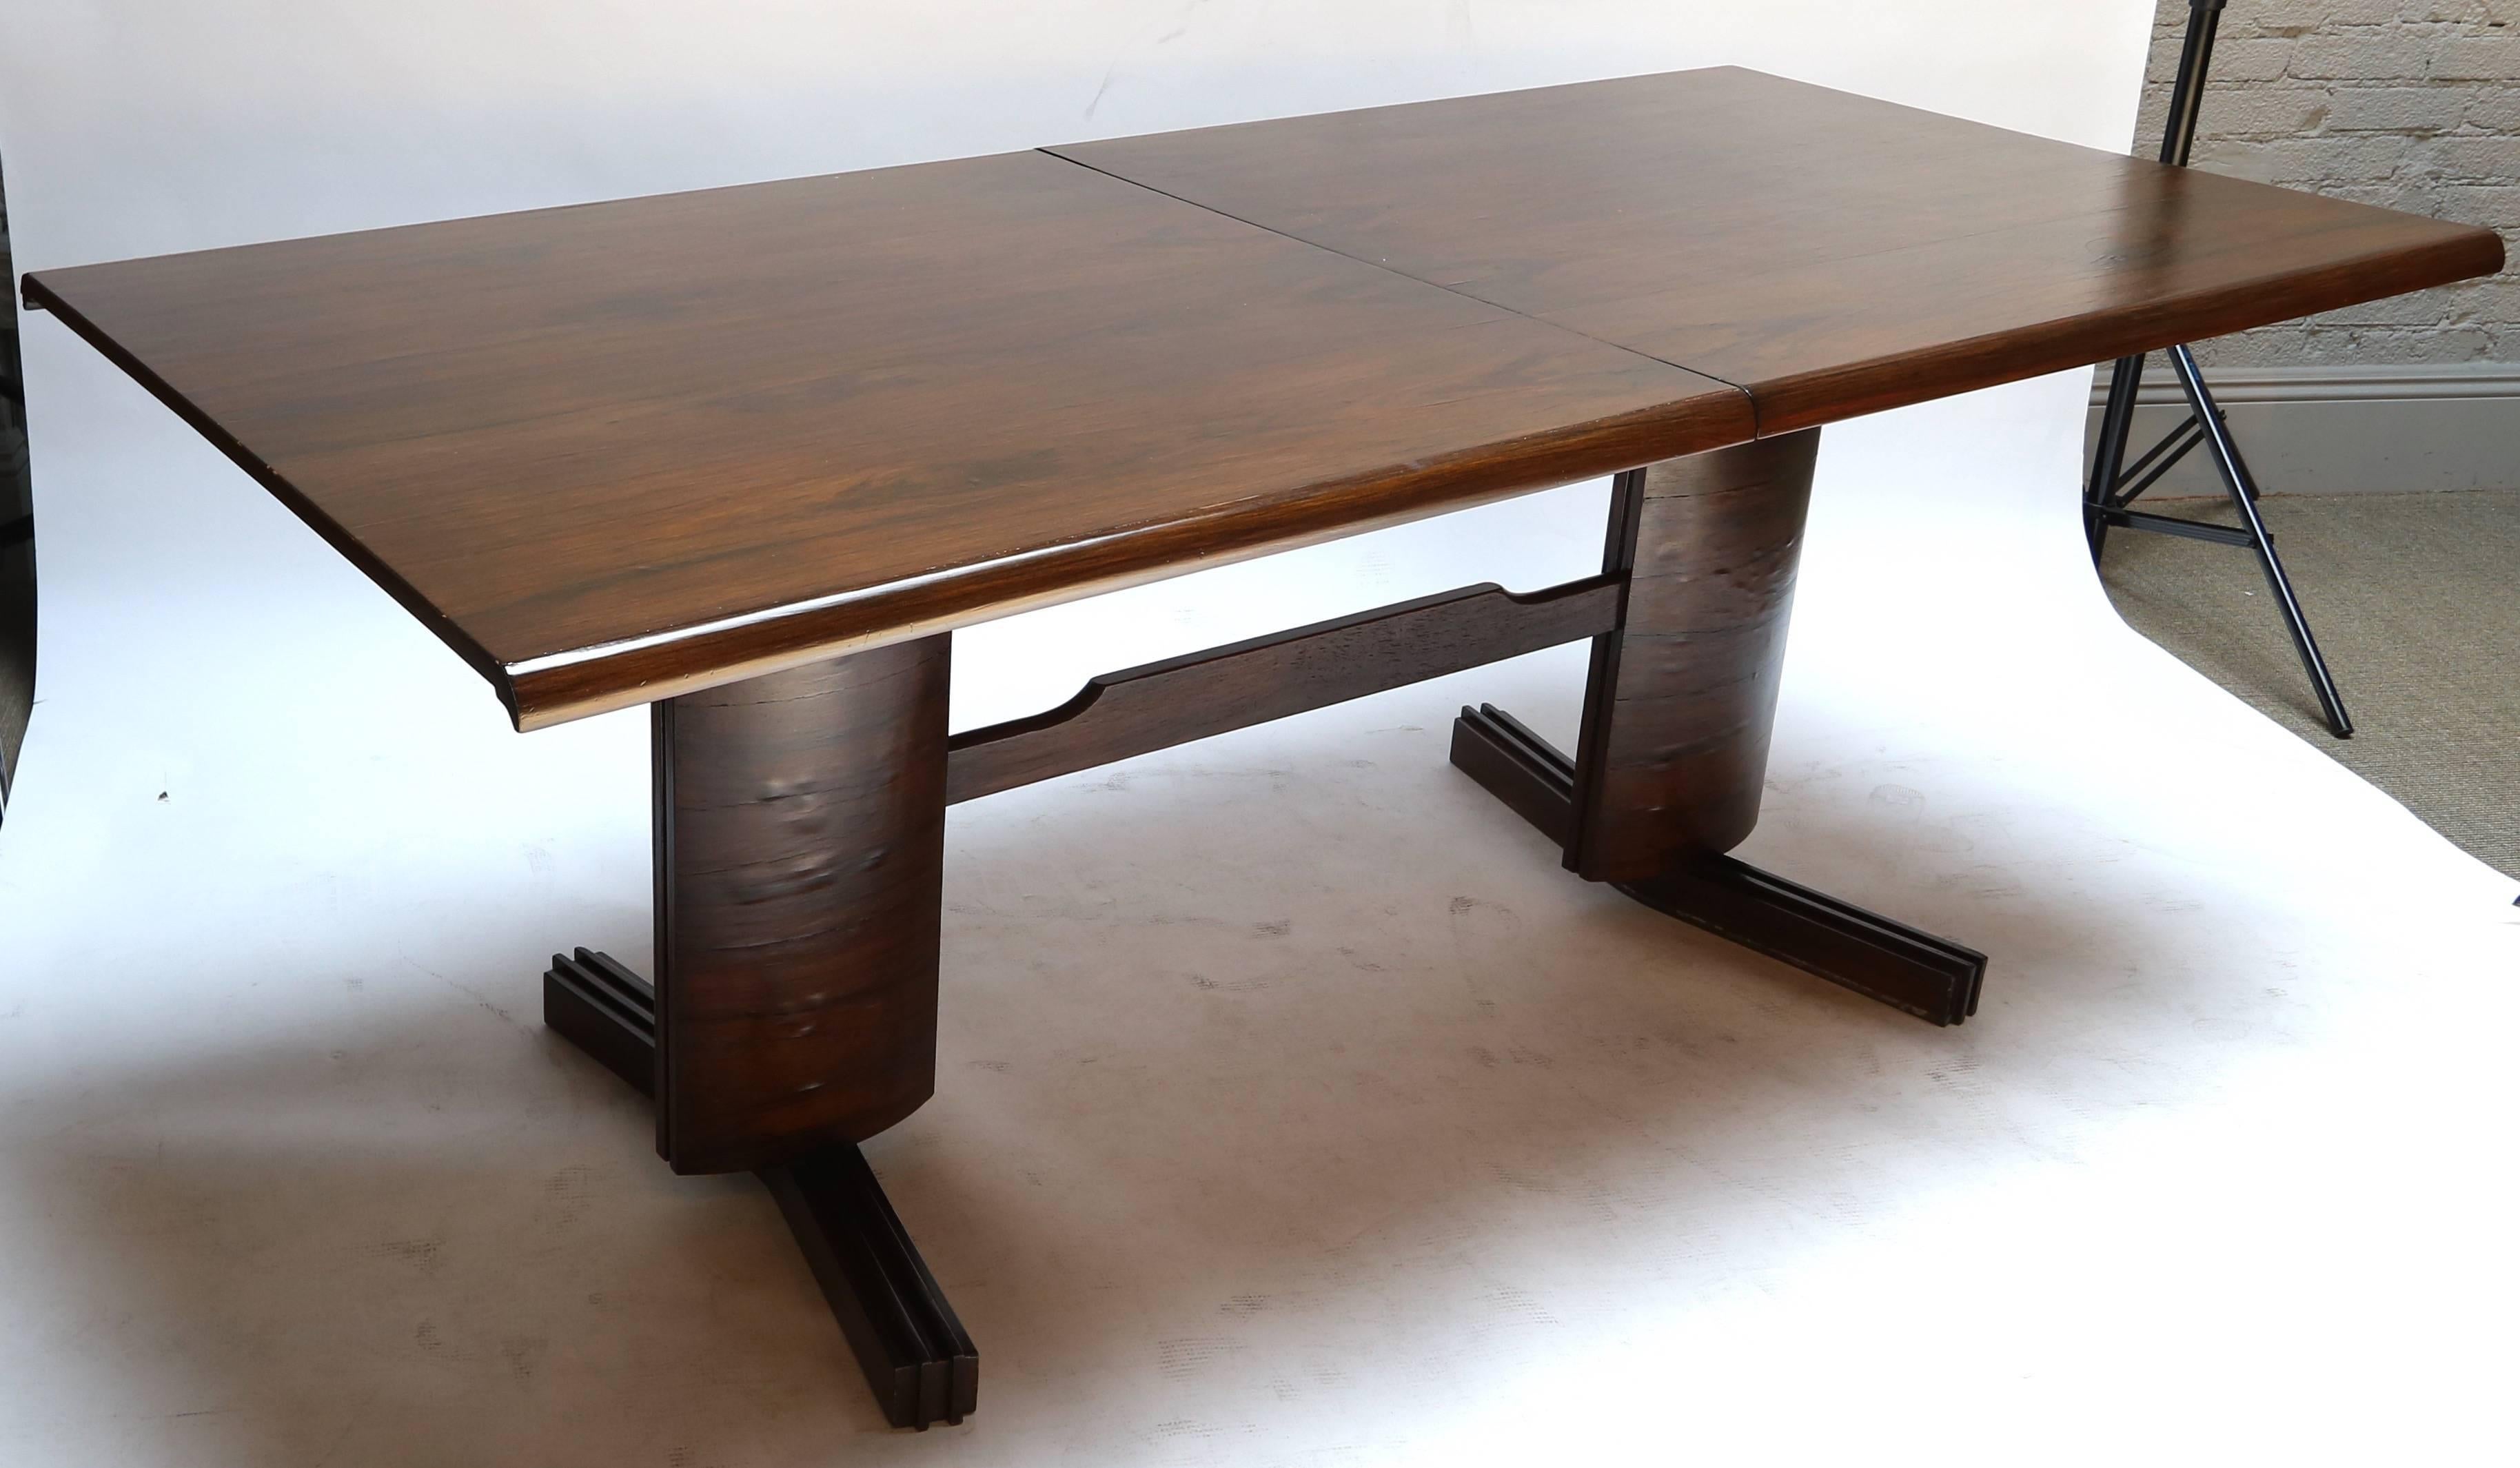 1950s spectacular Brazilian jacaranda dining table attributed to Julio Katinski for L'Atelier, Sao Paulo. The table has one leaf and extends to almost eight feet.

Length with leaf: 94.5